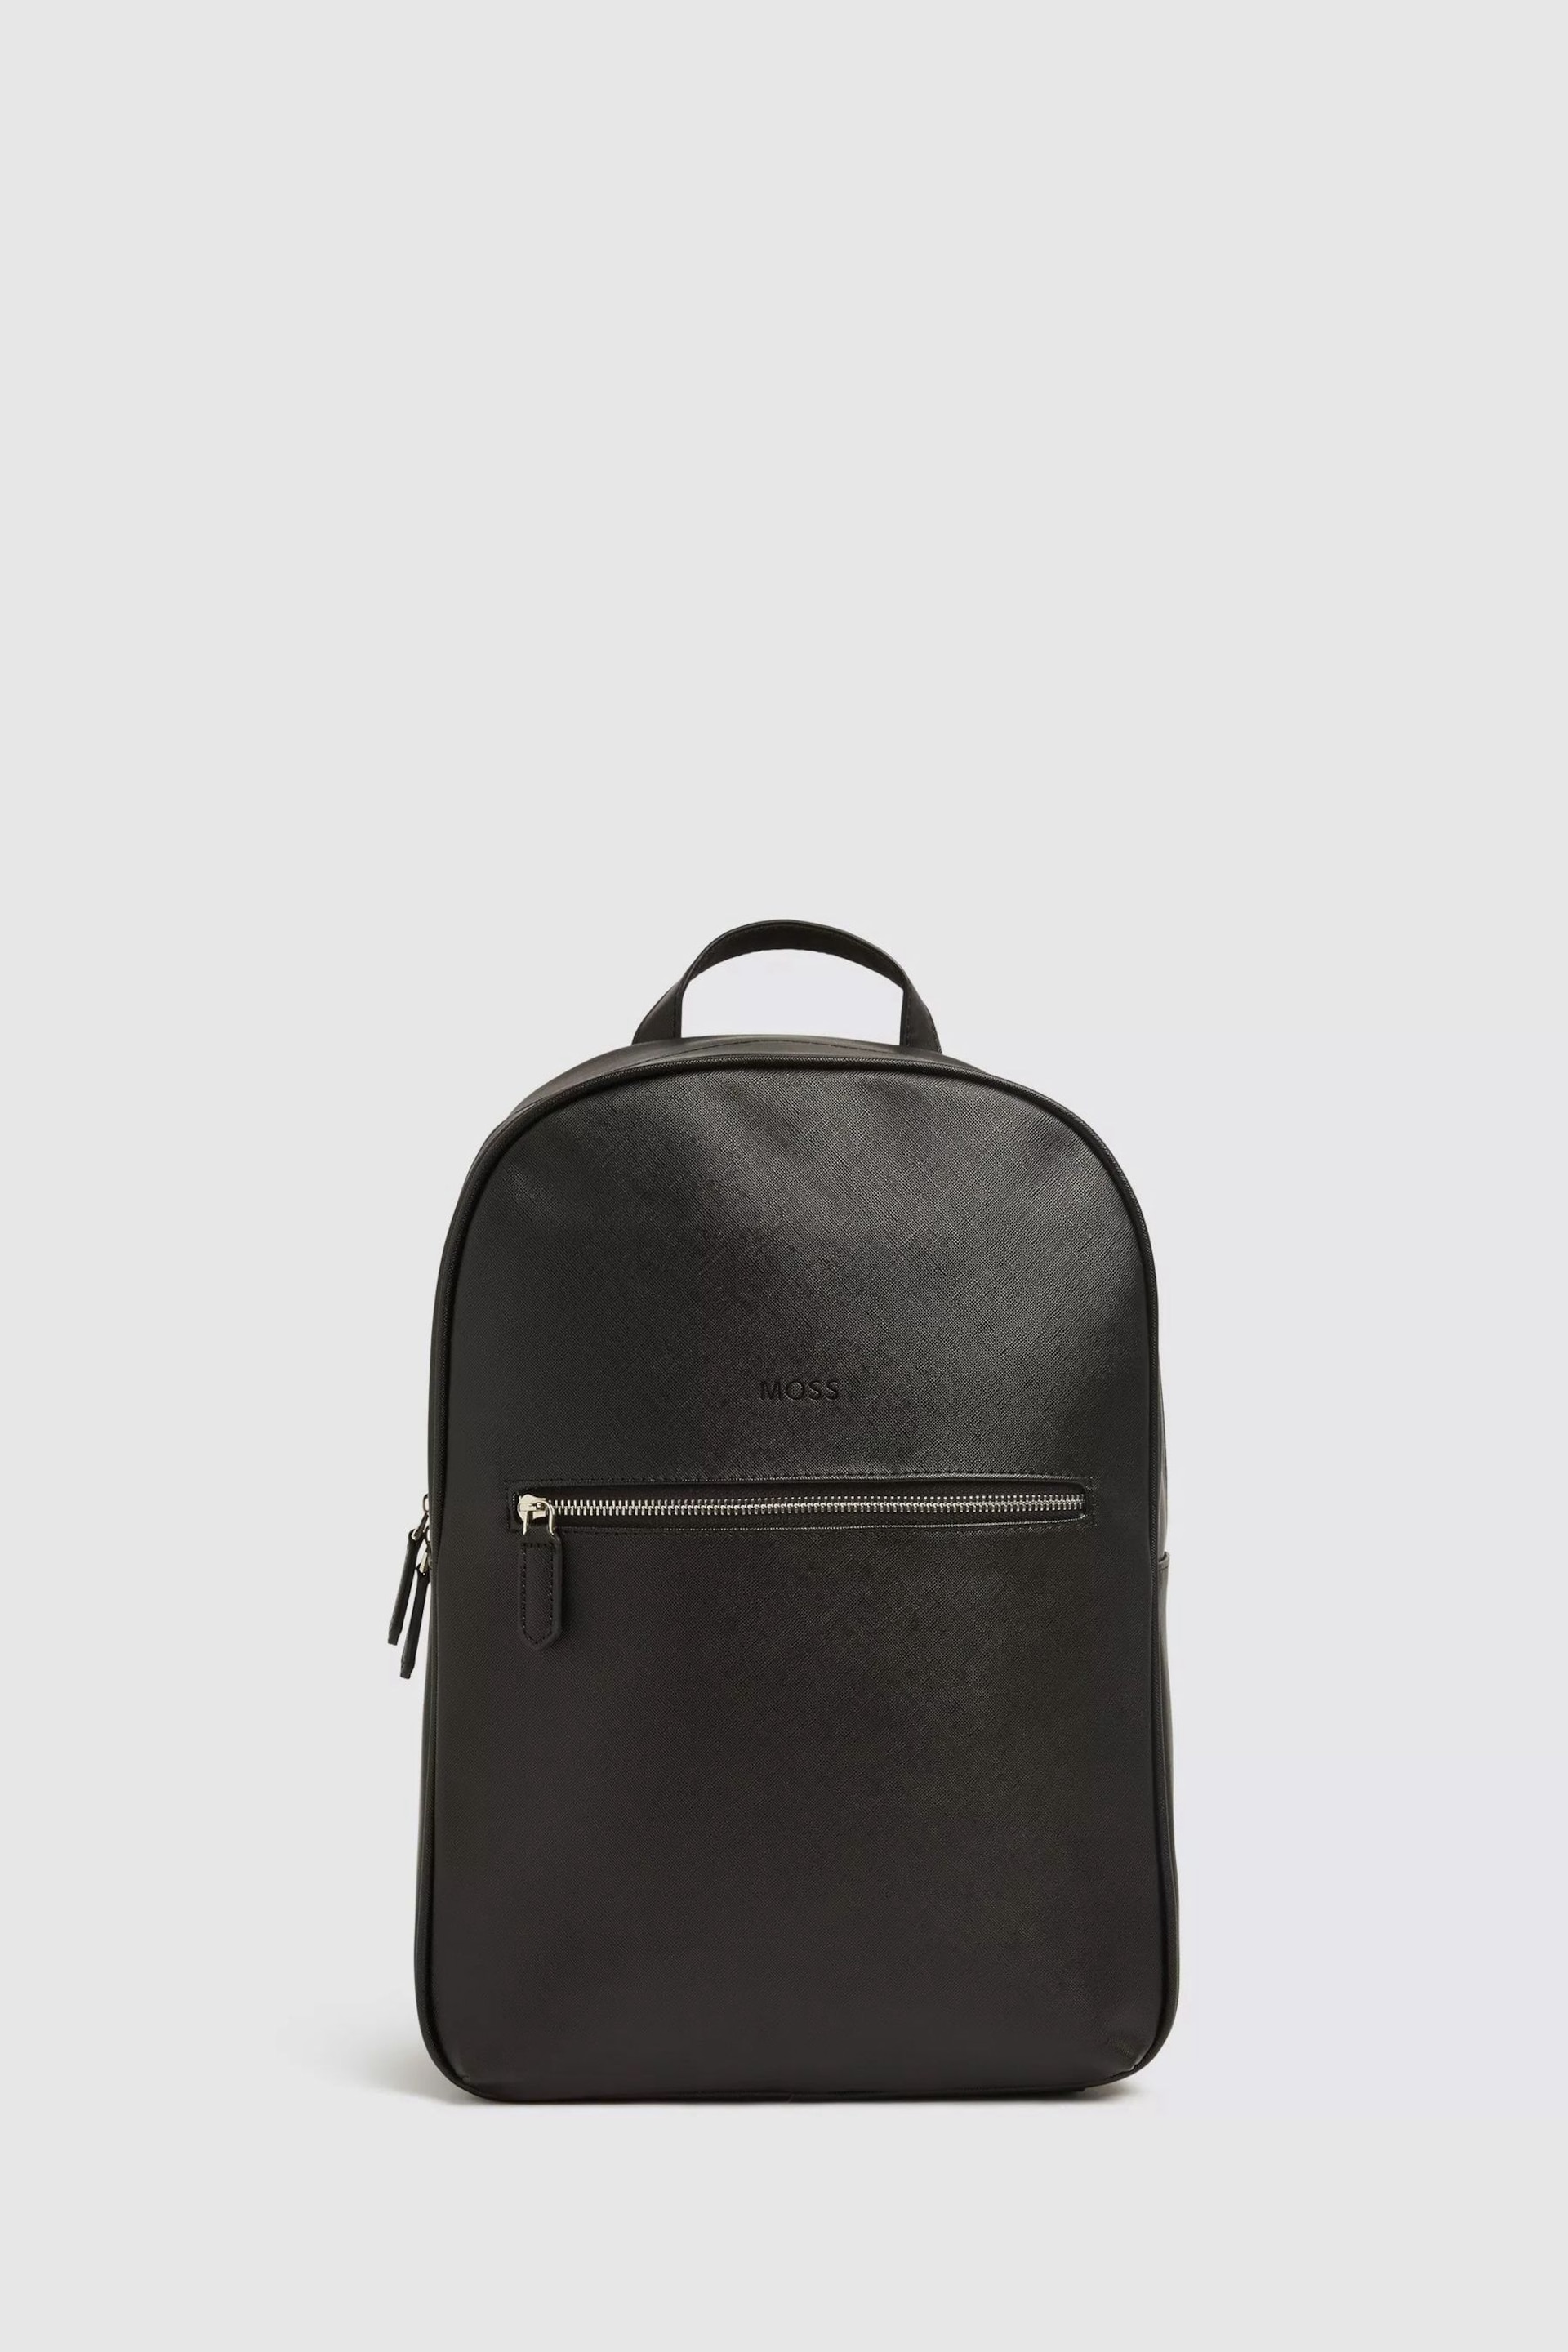 MOSS Black Saffiano Backpack - Image 1 of 4